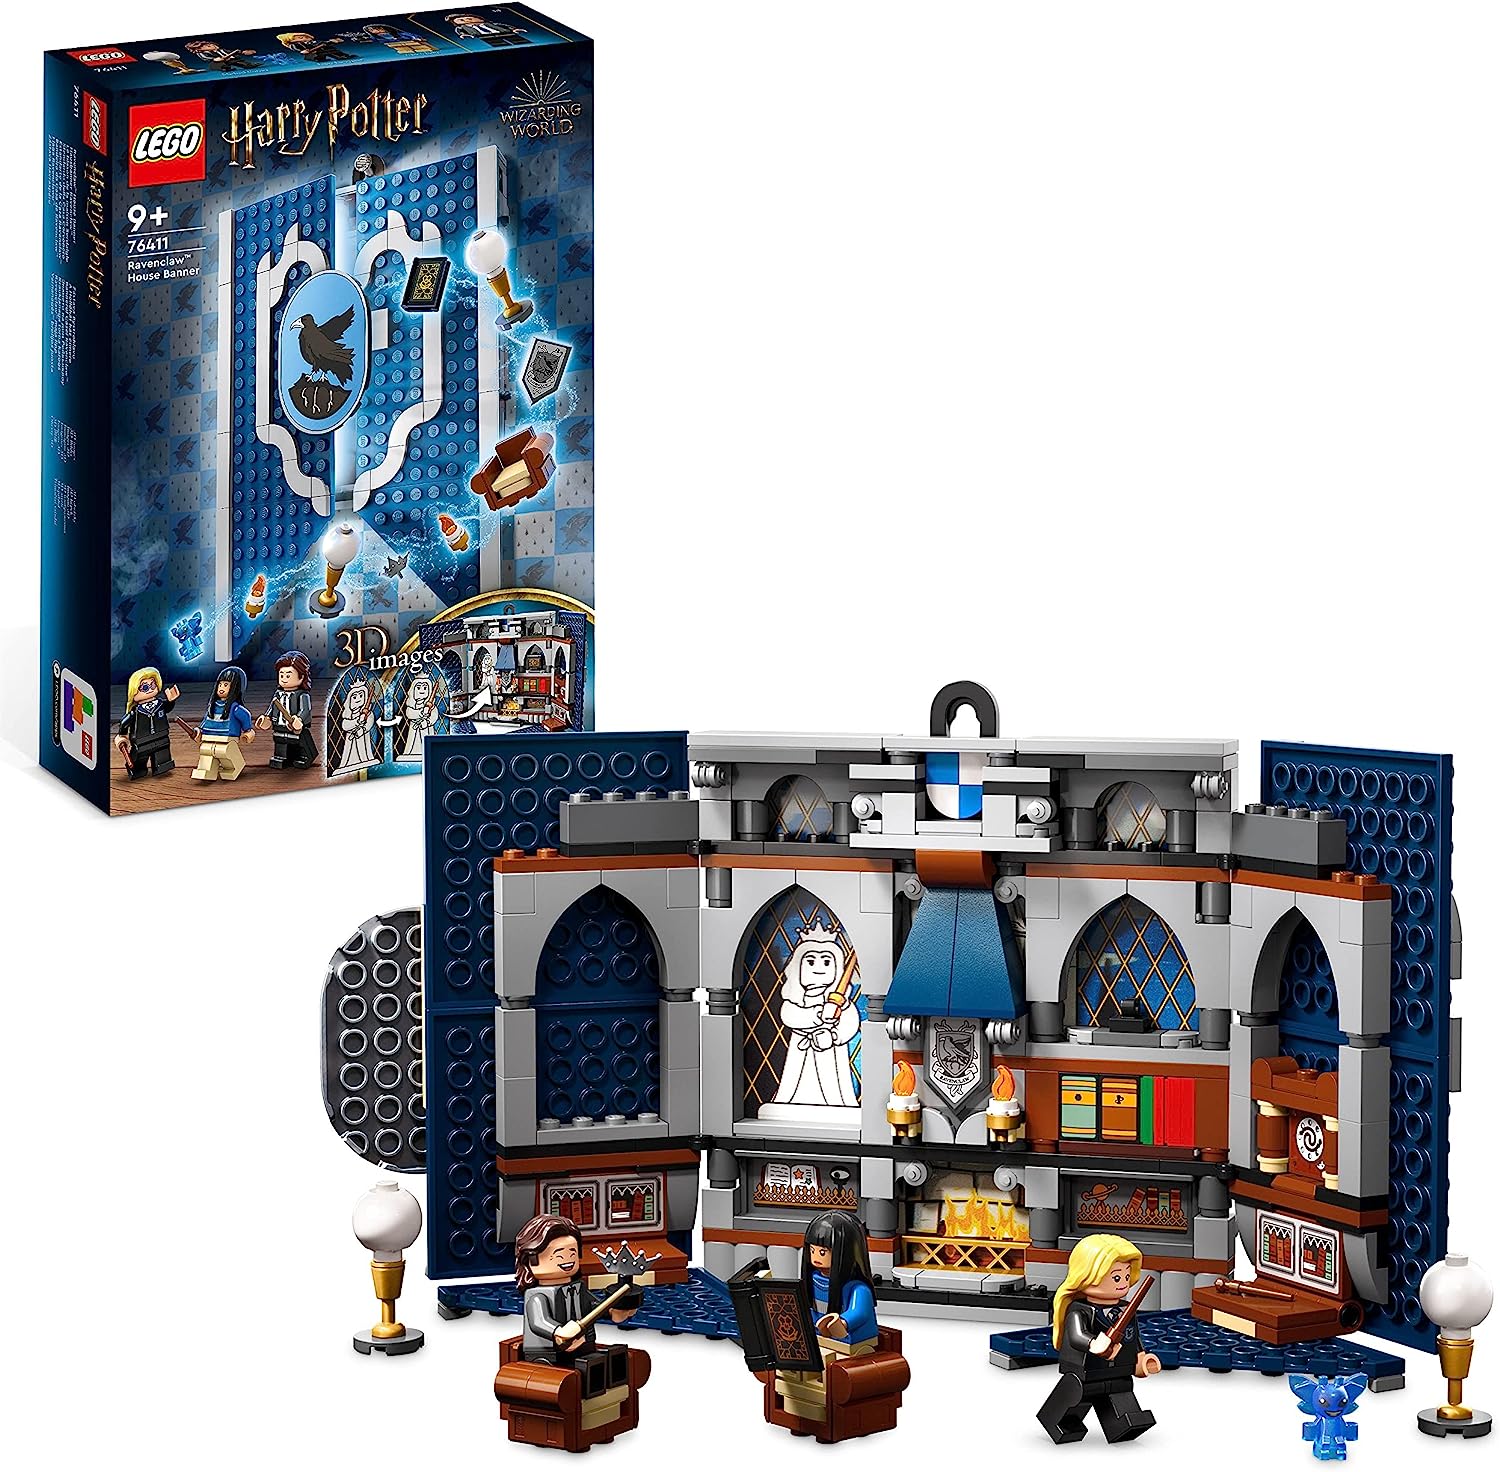 LEGO 76411 Harry Potter House Banner Ravenclaw, Hogwarts Coat of Arms, Castle Community Room Toy or Wall Display with Luna Lovegood Mini Figure, Collectable Travel Toy